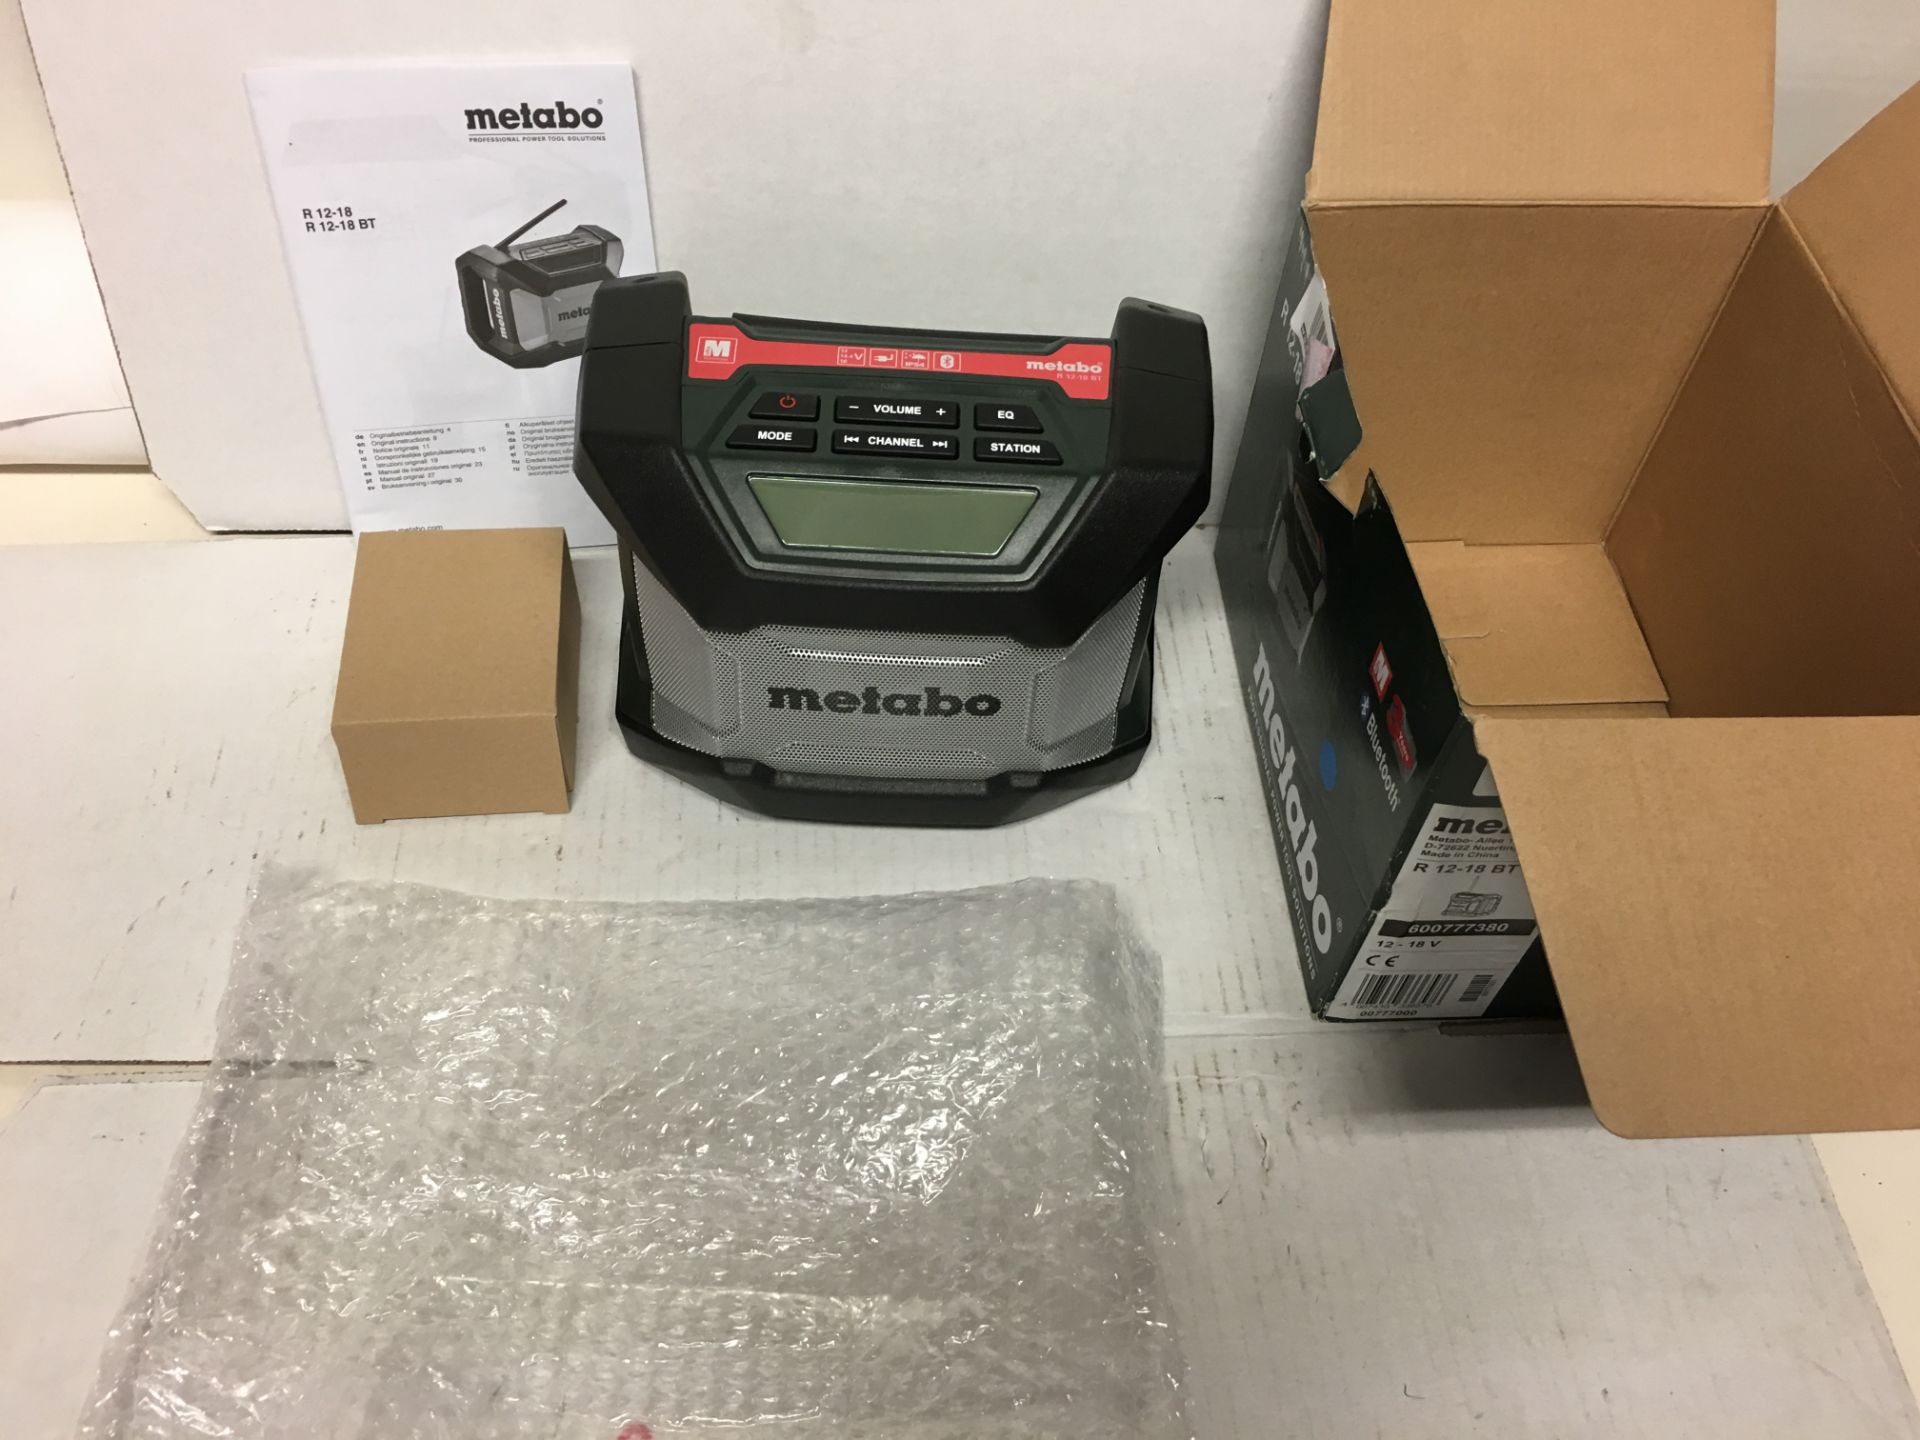 1 x Metabo R 12-18 BT (600777380) Cordless Worksite Radio (Bare Unit) | EAN: 4007430336576 | RRP £66 - Image 4 of 4